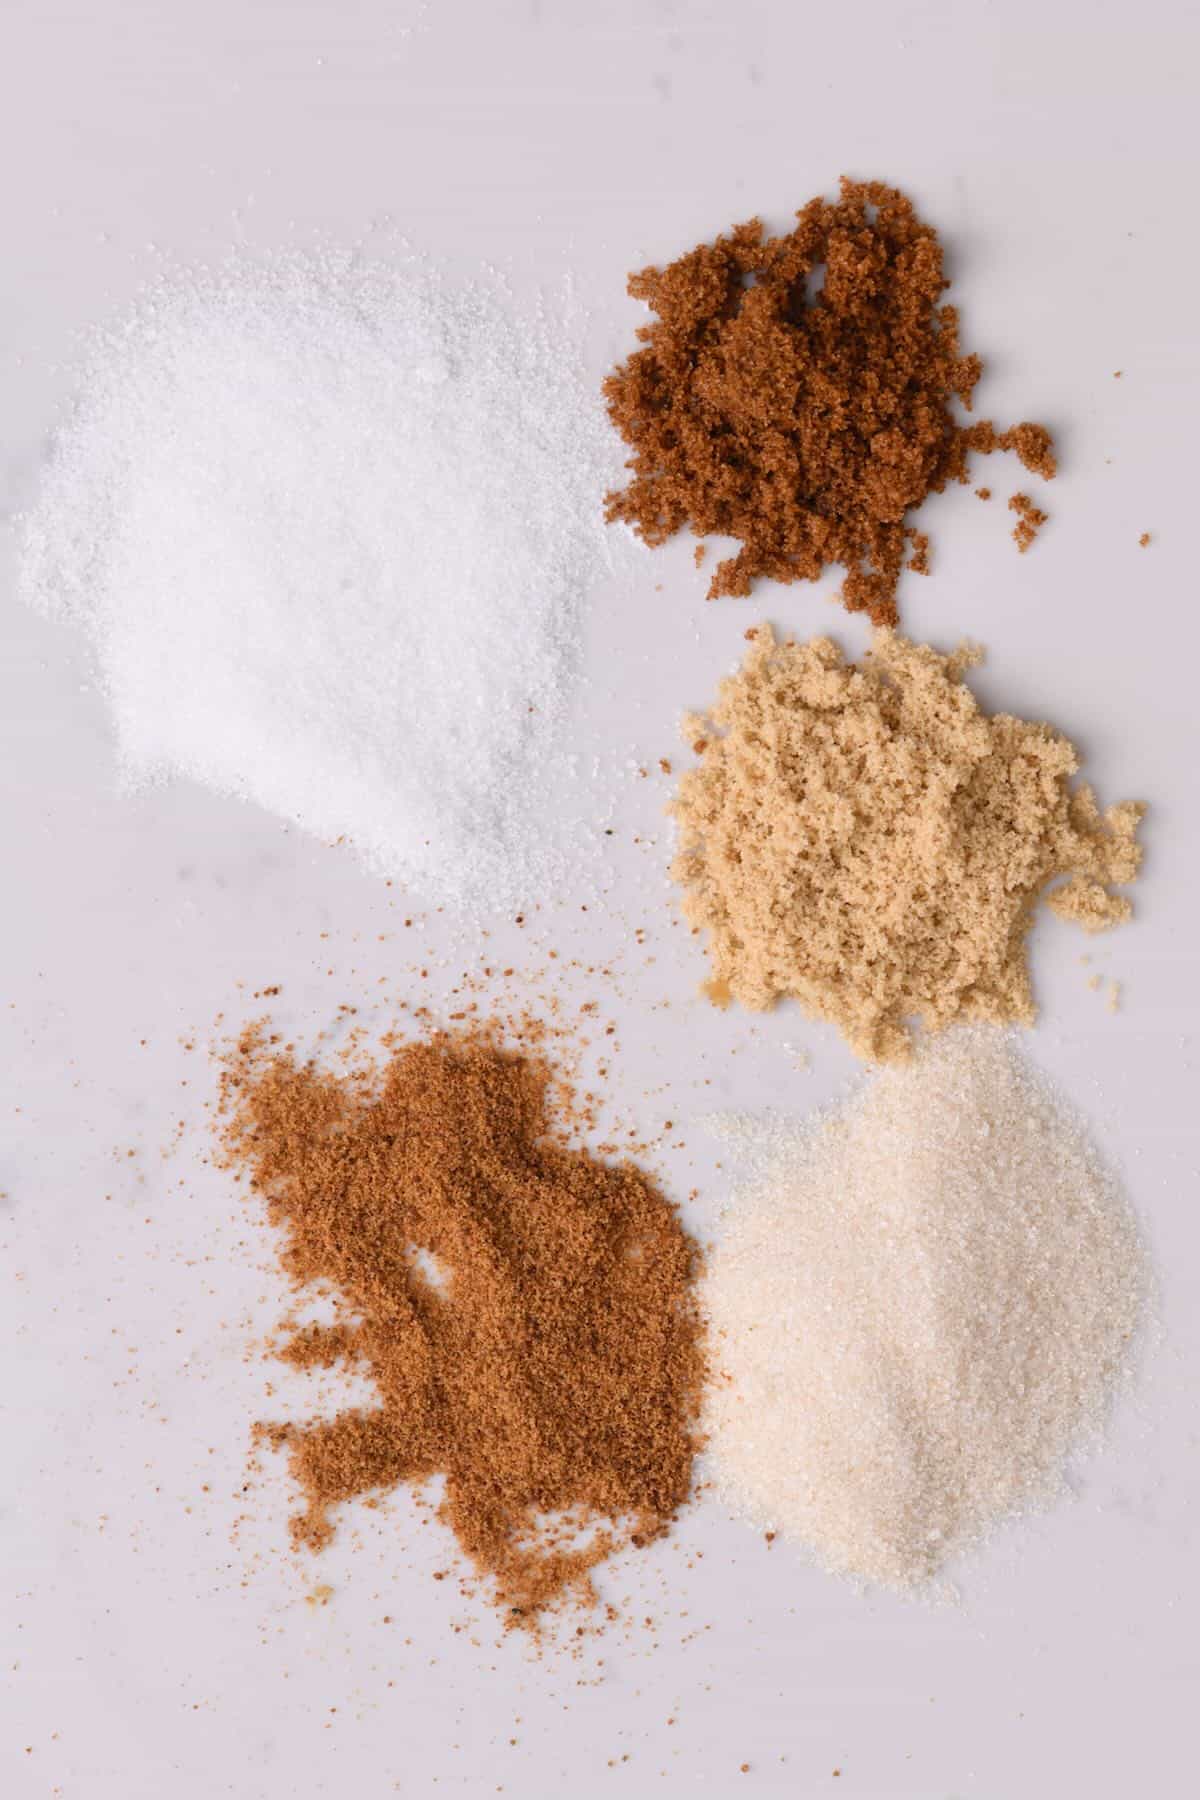 Different types of granulated sugars